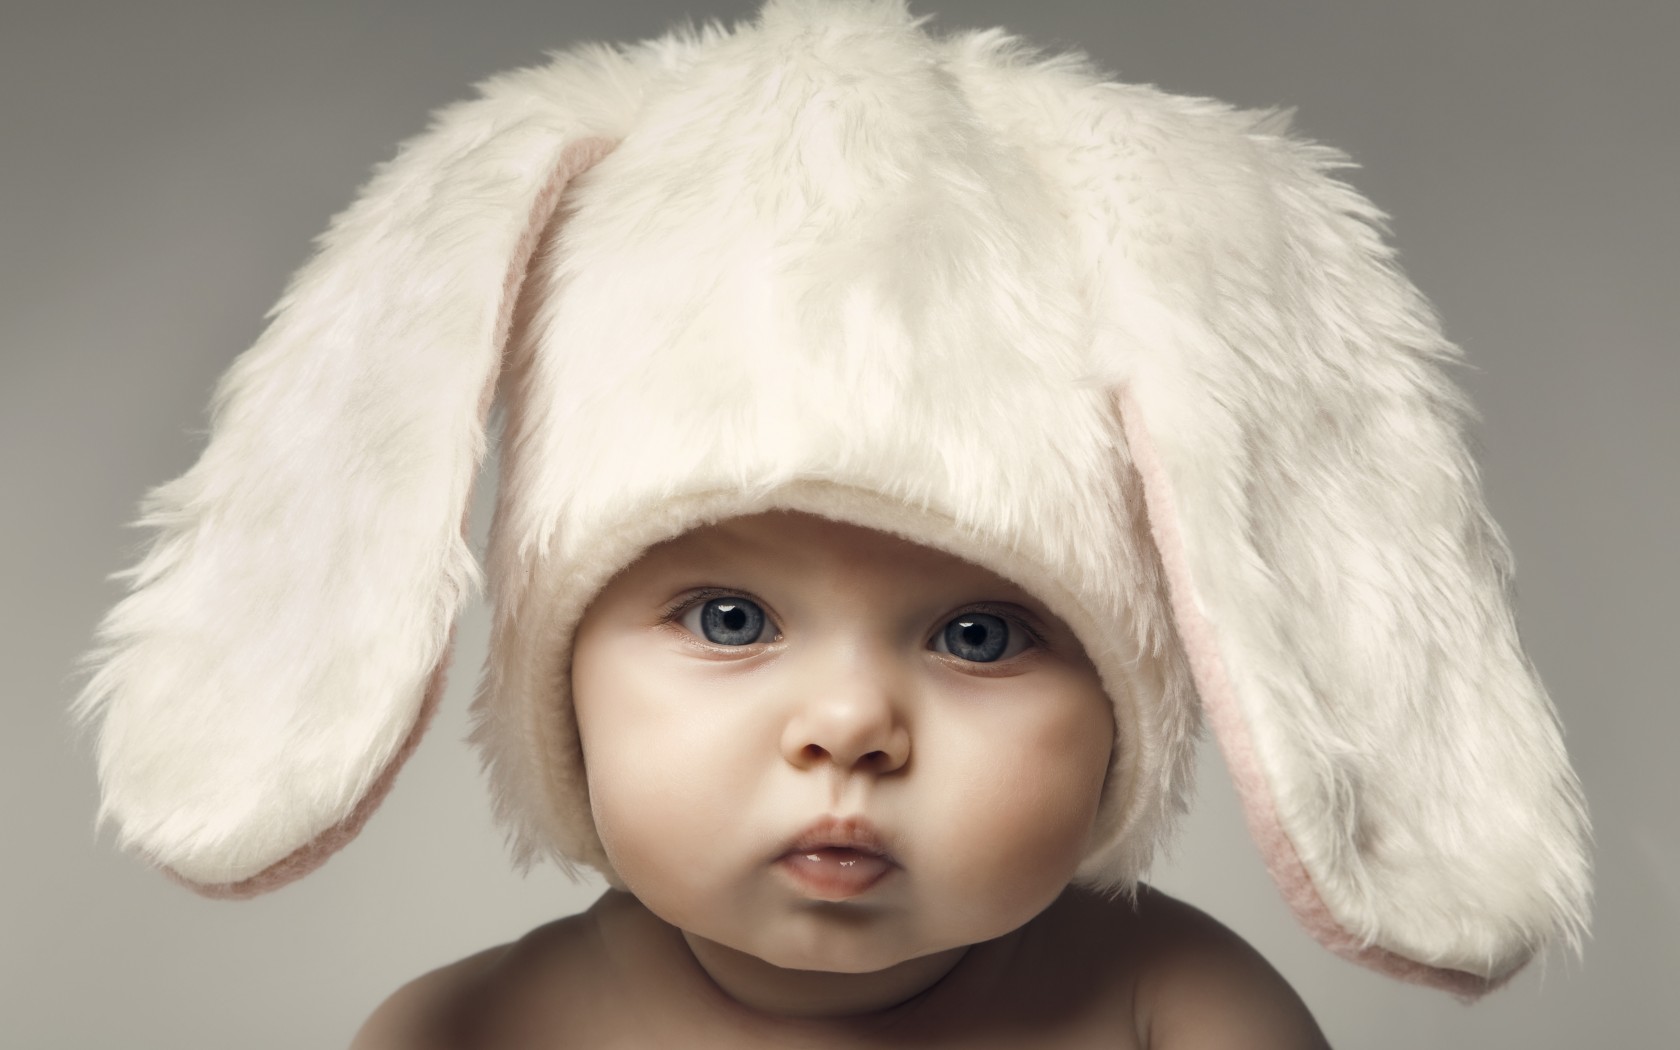 Baby Big Beautiful Blue Eyes Funny Kids Adorable Hats Easter